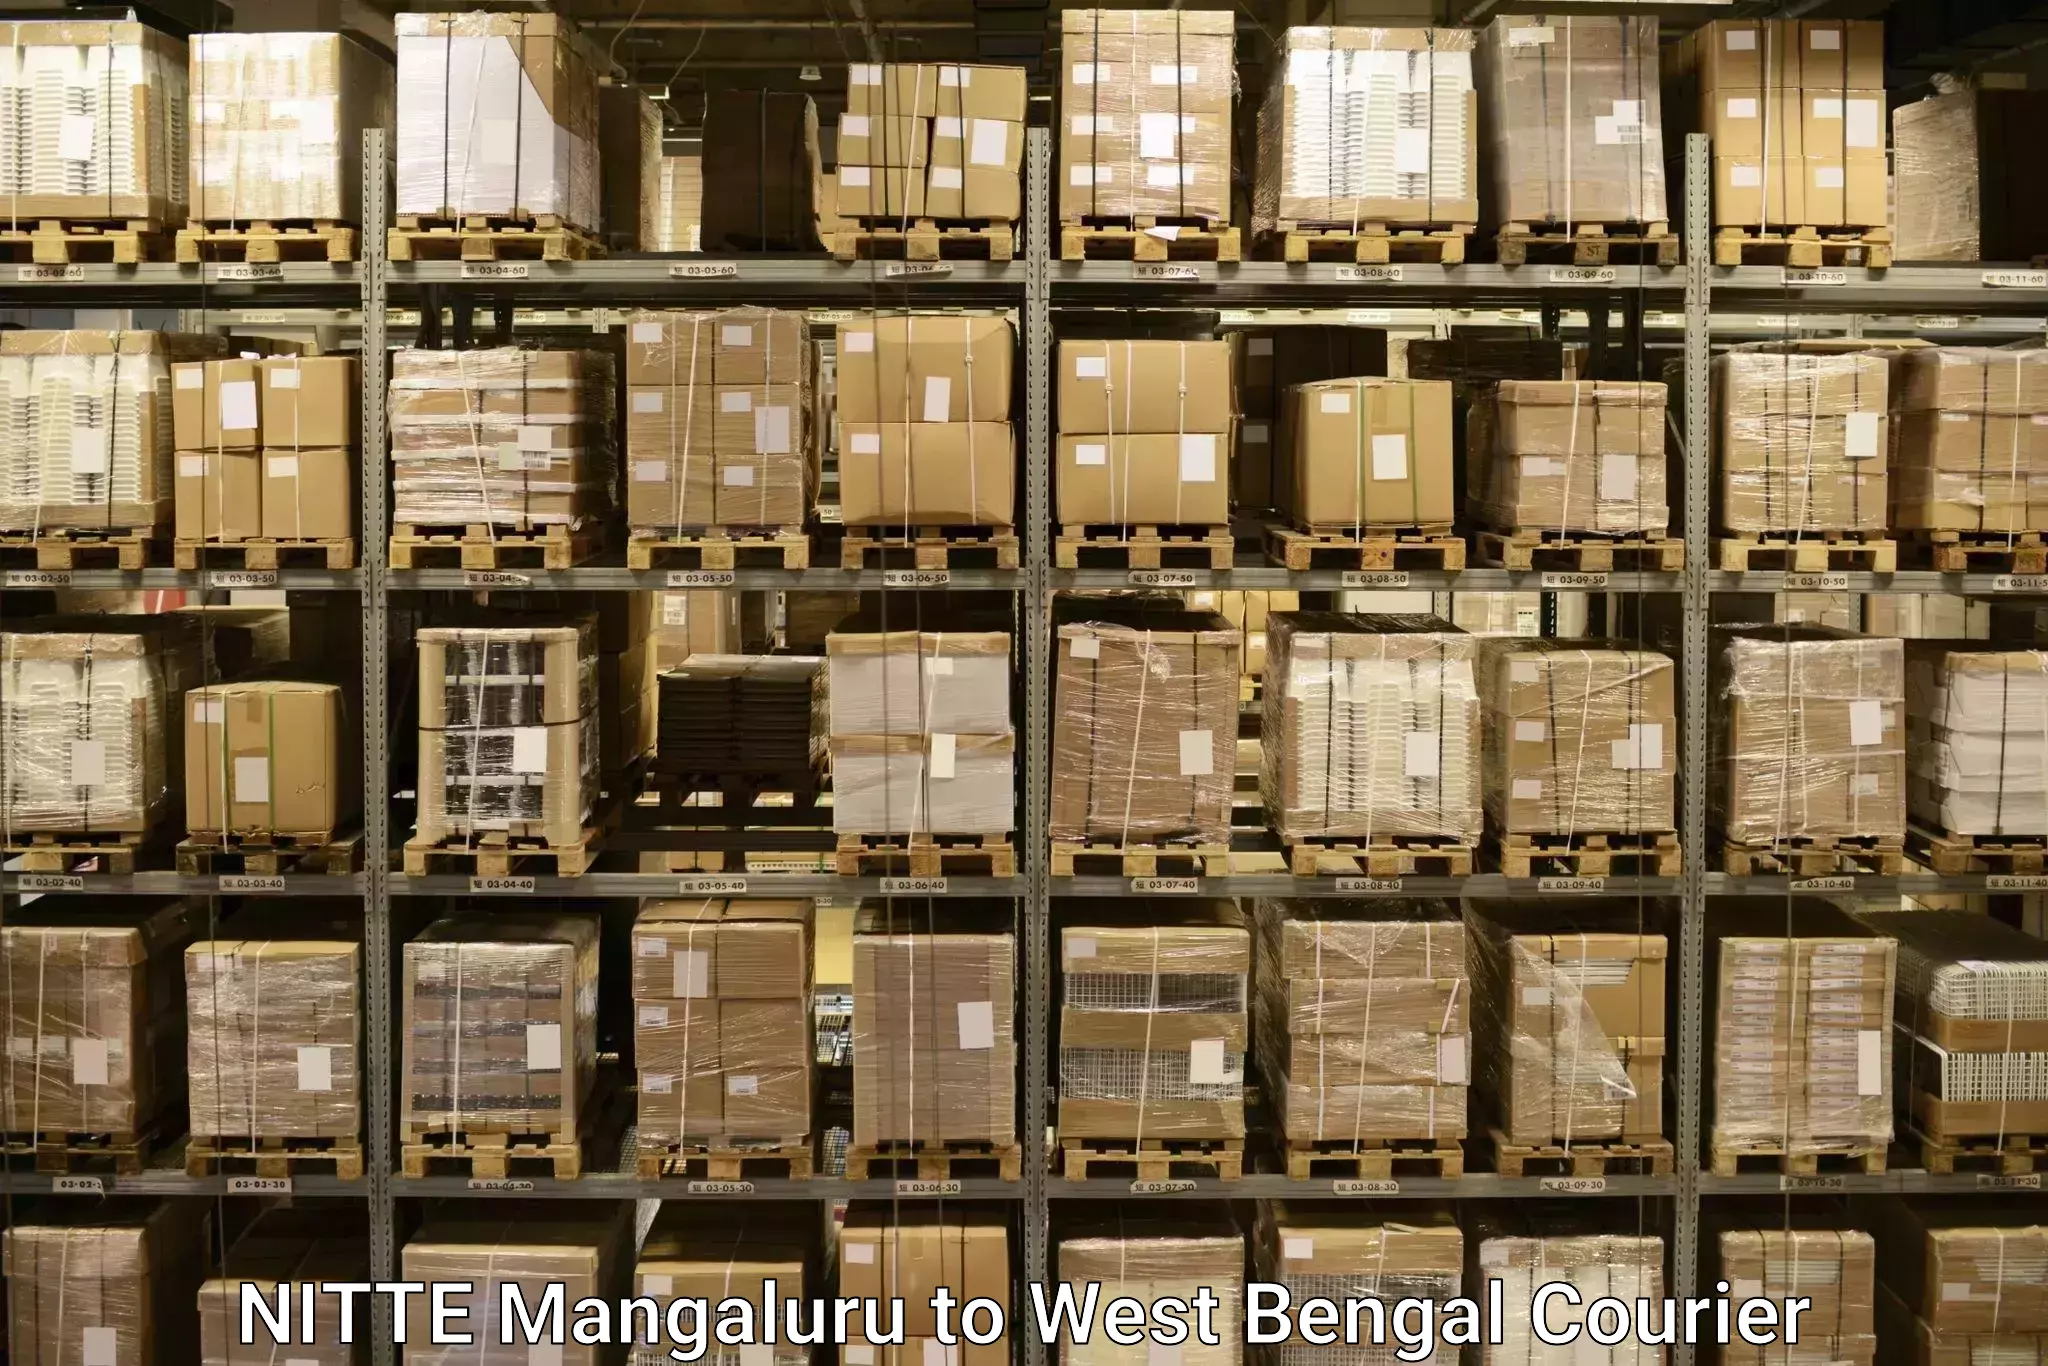 Baggage relocation service in NITTE Mangaluru to Hemtabad